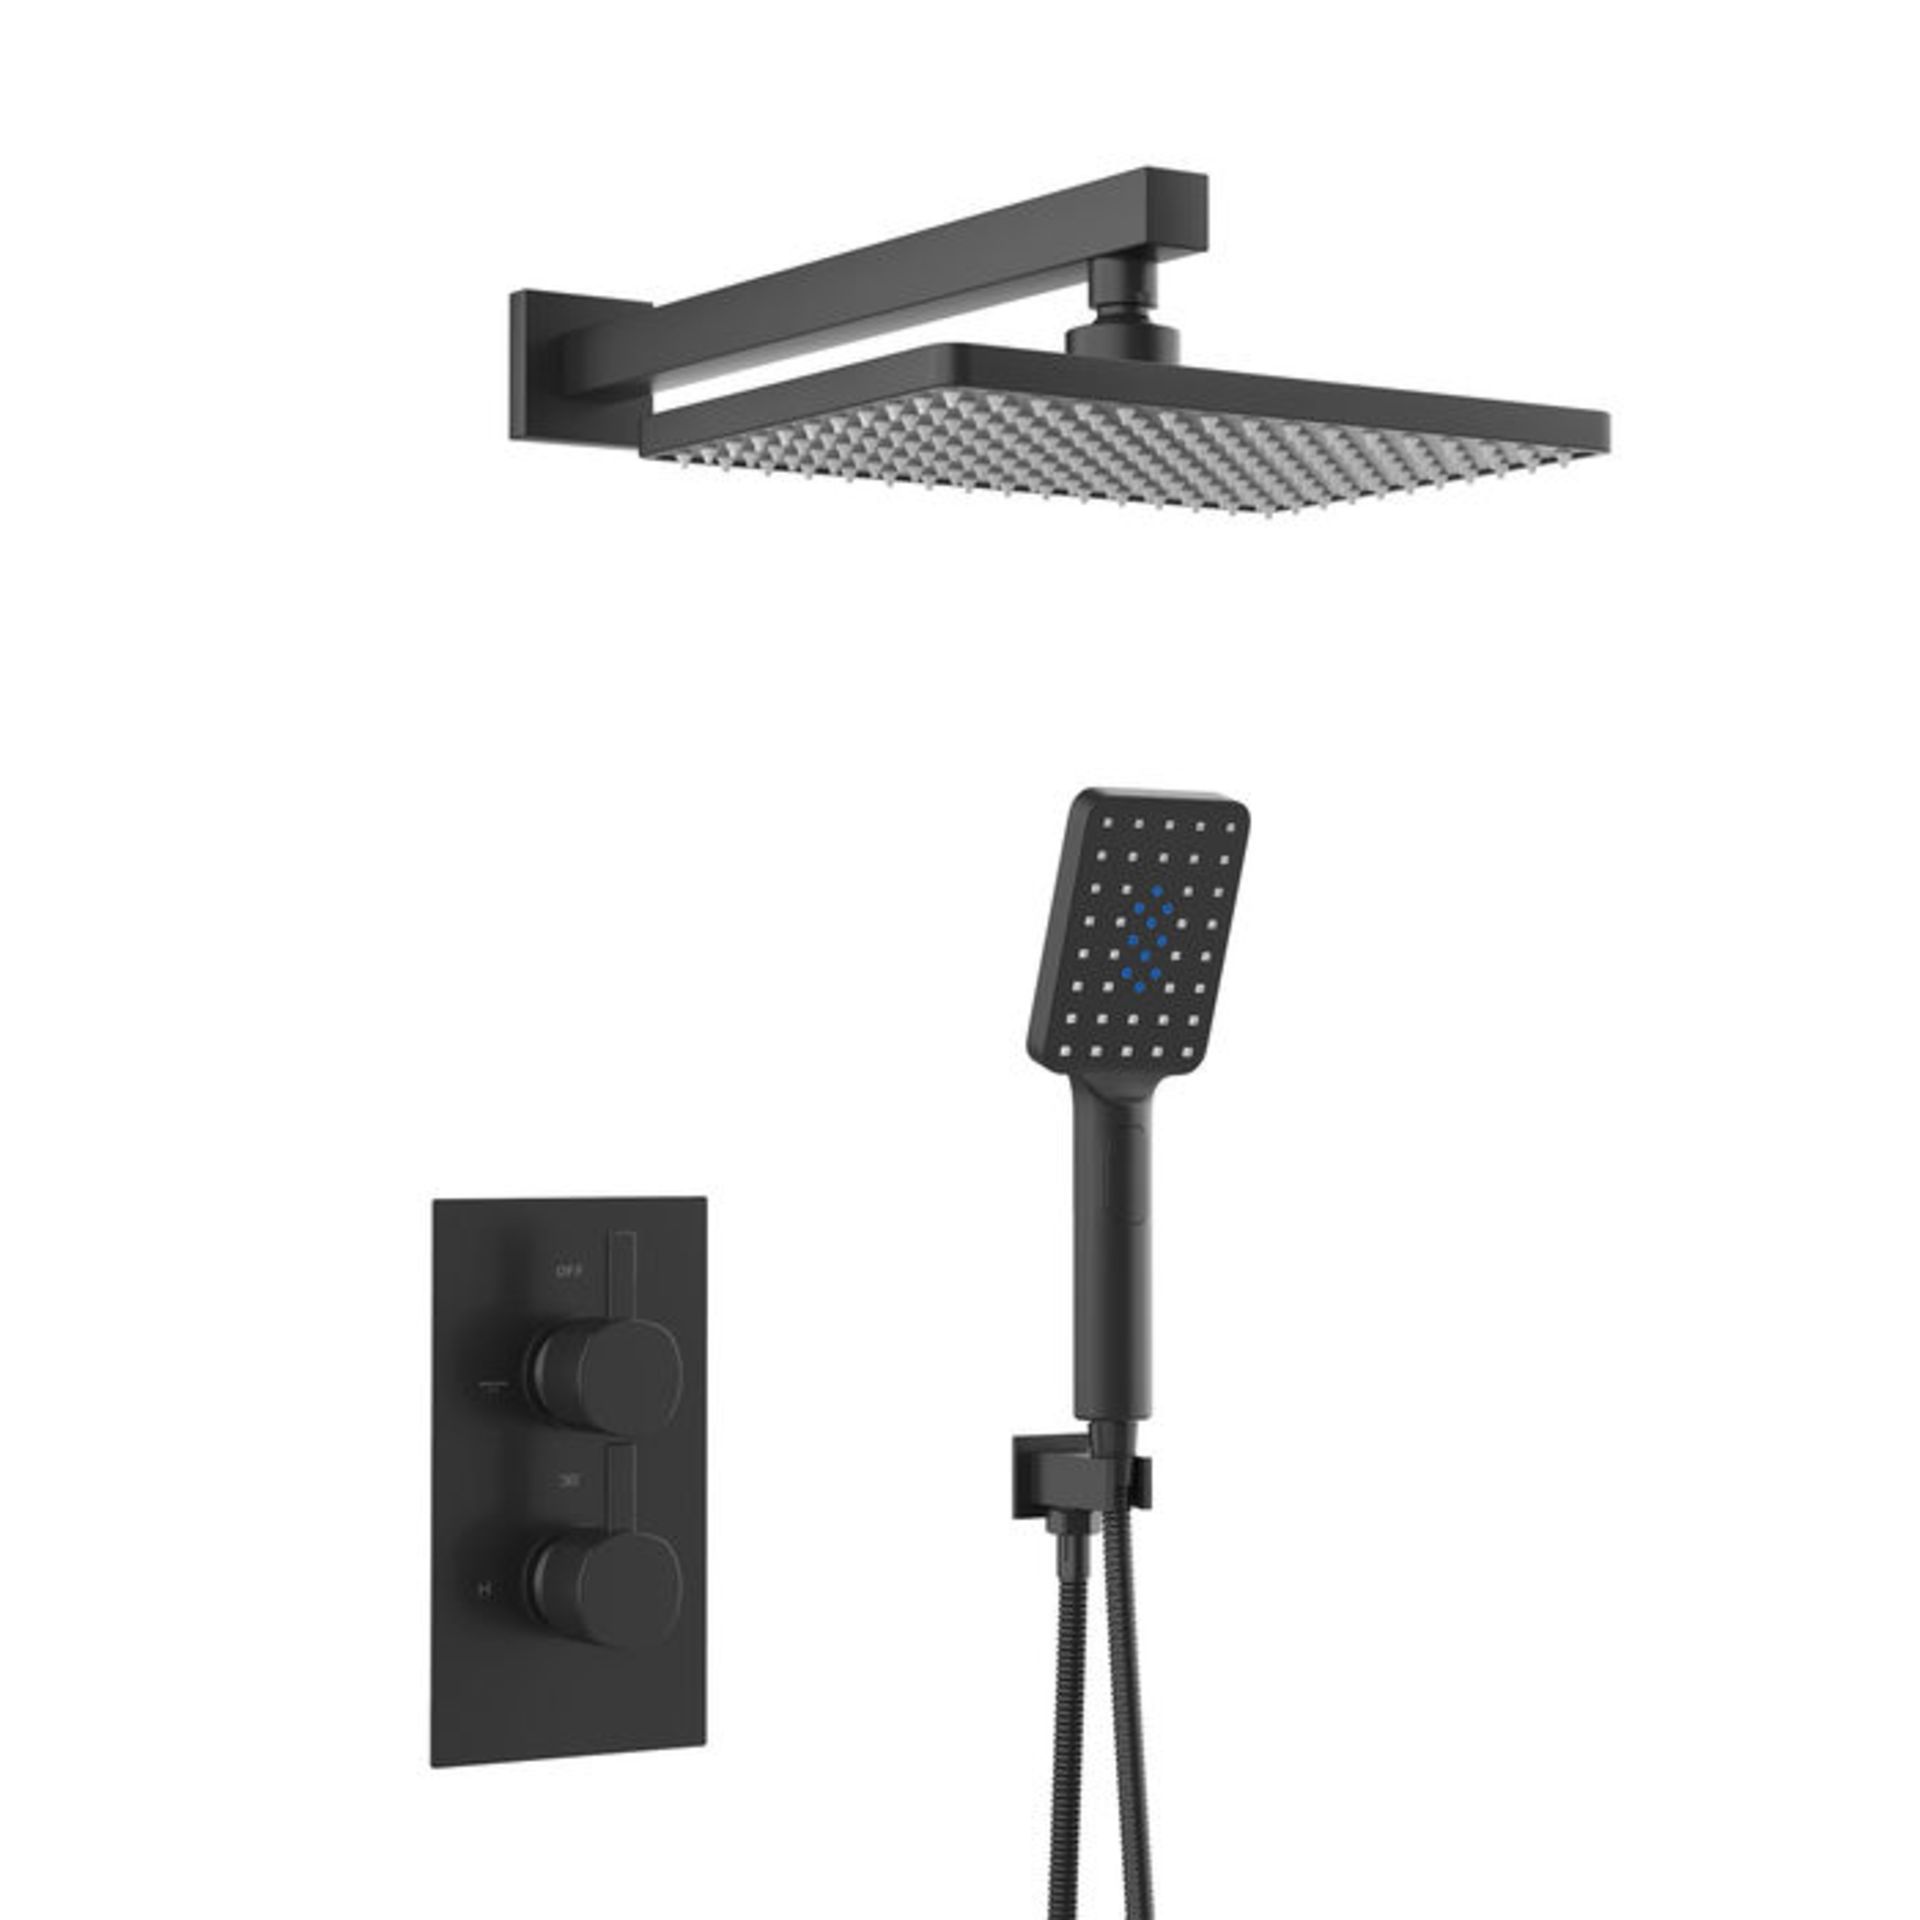 (LP166) Square Concealed Thermostatic Mixer Shower Kit & Large Head, Matte Black. Premium on trend - Image 4 of 4